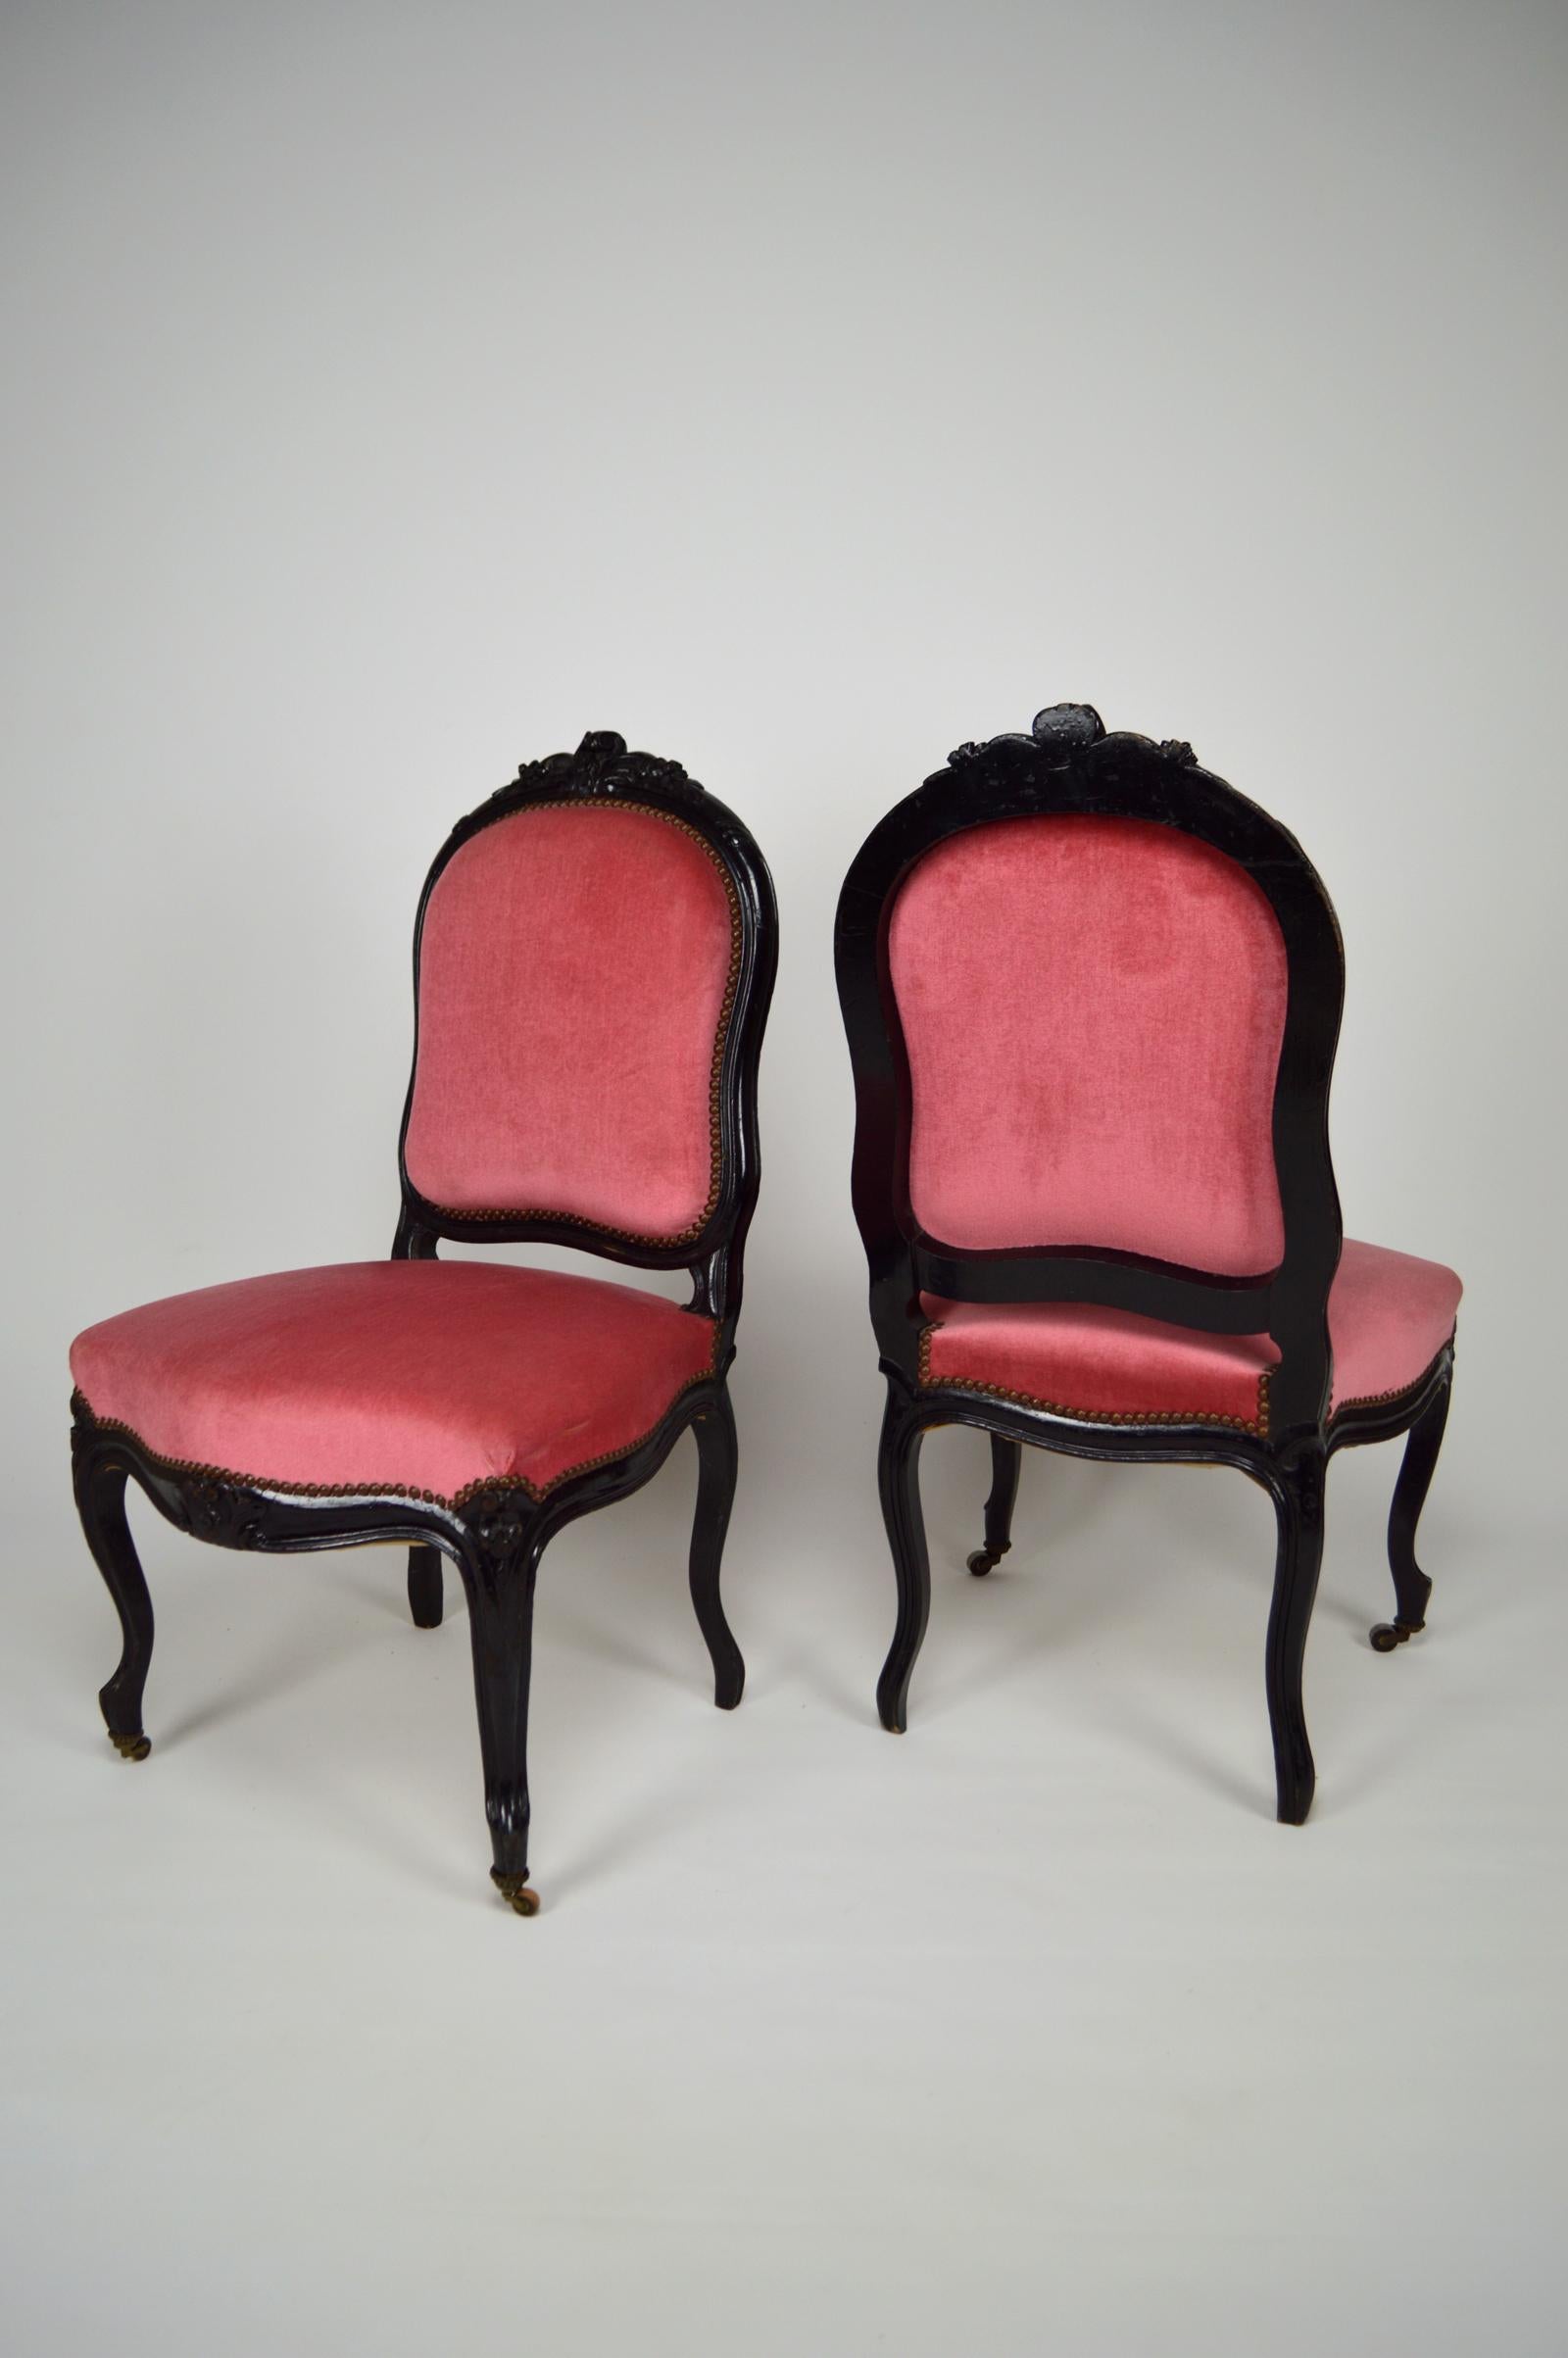 Living room set consisting of one old living room / game table and its two chairs.

The whole is in blackened wood carved on a floral theme.
The seats and backs of the chairs are covered with a pink velvet fabric.
Casters are present at the legs